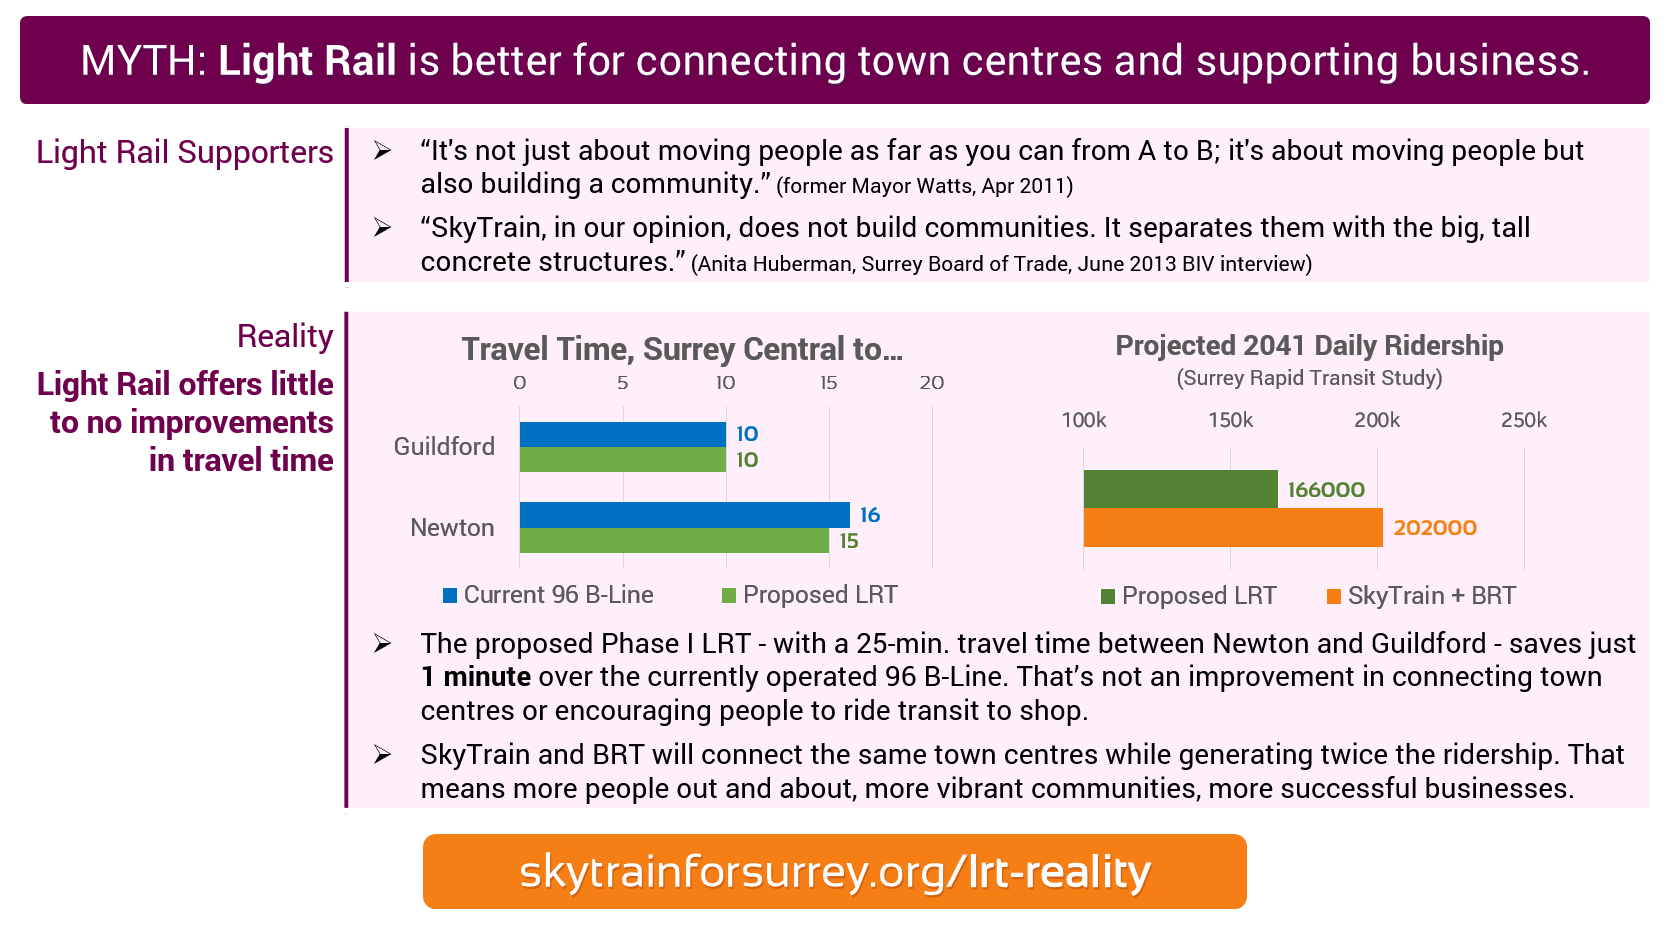 MYTH: Light Rail is better for connecting town centres and supporting business; REALITY: Light Rail offers little to no improvements in travel time.